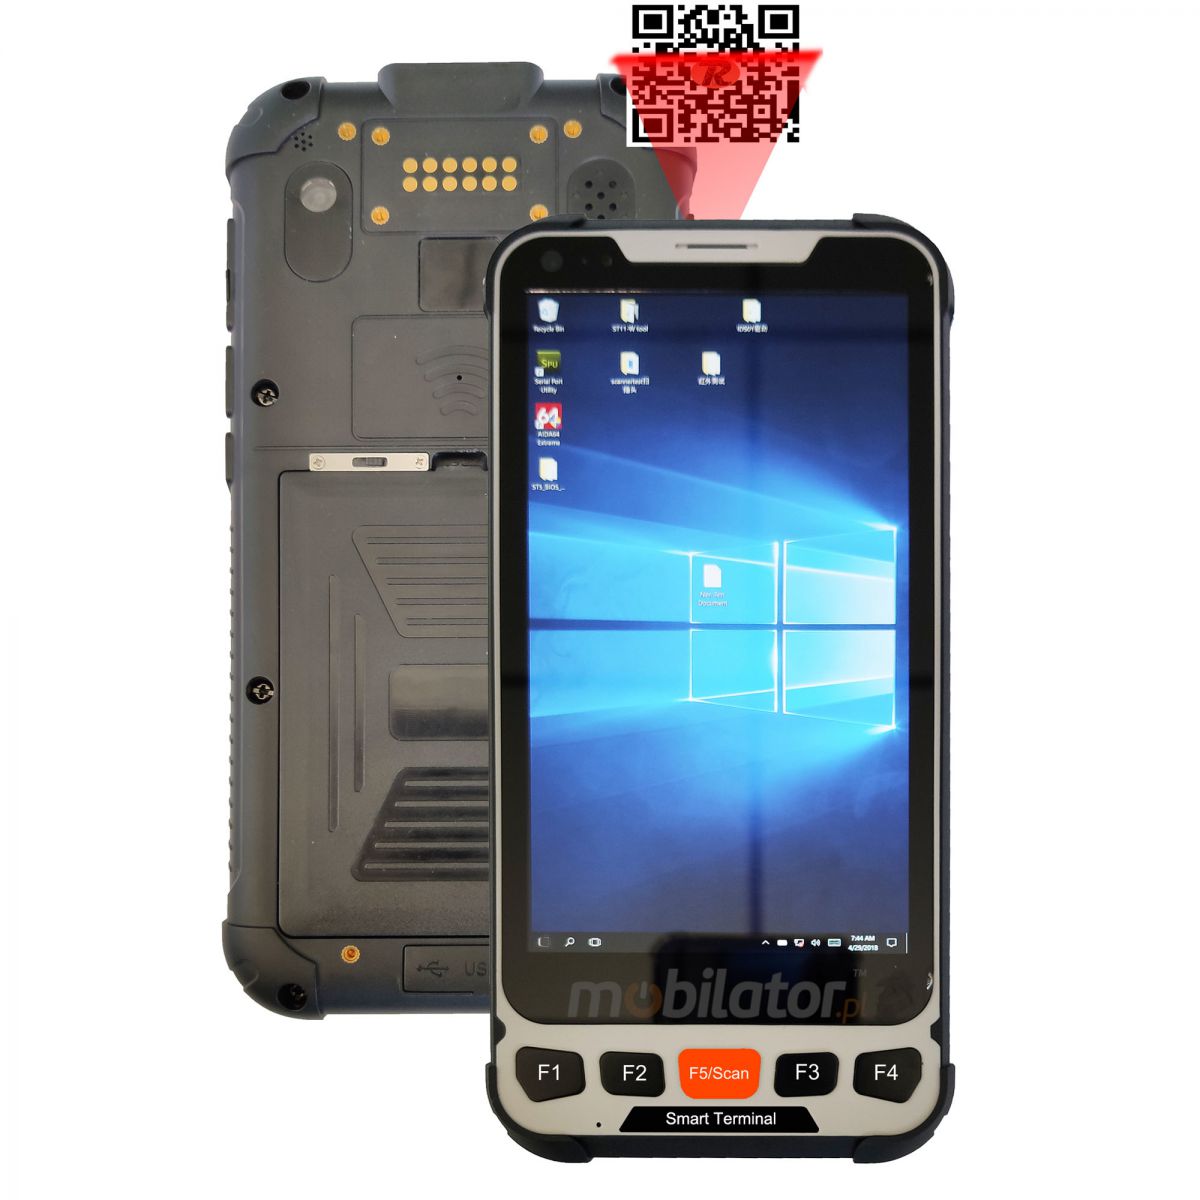 Data collector with 64GB ROM disk and 4GB RAM memory, WINDOWS 10, IP67 and NFC standards - Mobipad SH5 v.1 